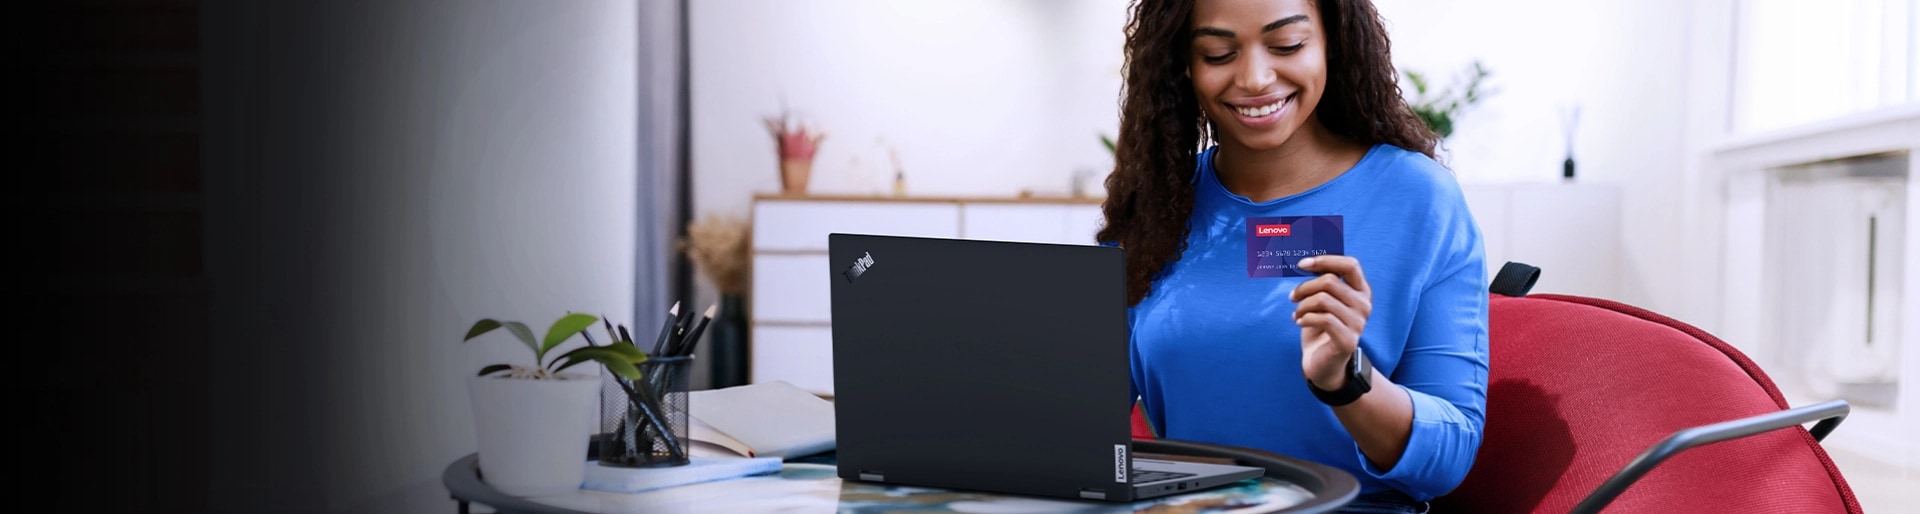 Women sitting in front of a Lenovo ThinkPad laptop and holding a credit card with the Lenovo logo in it